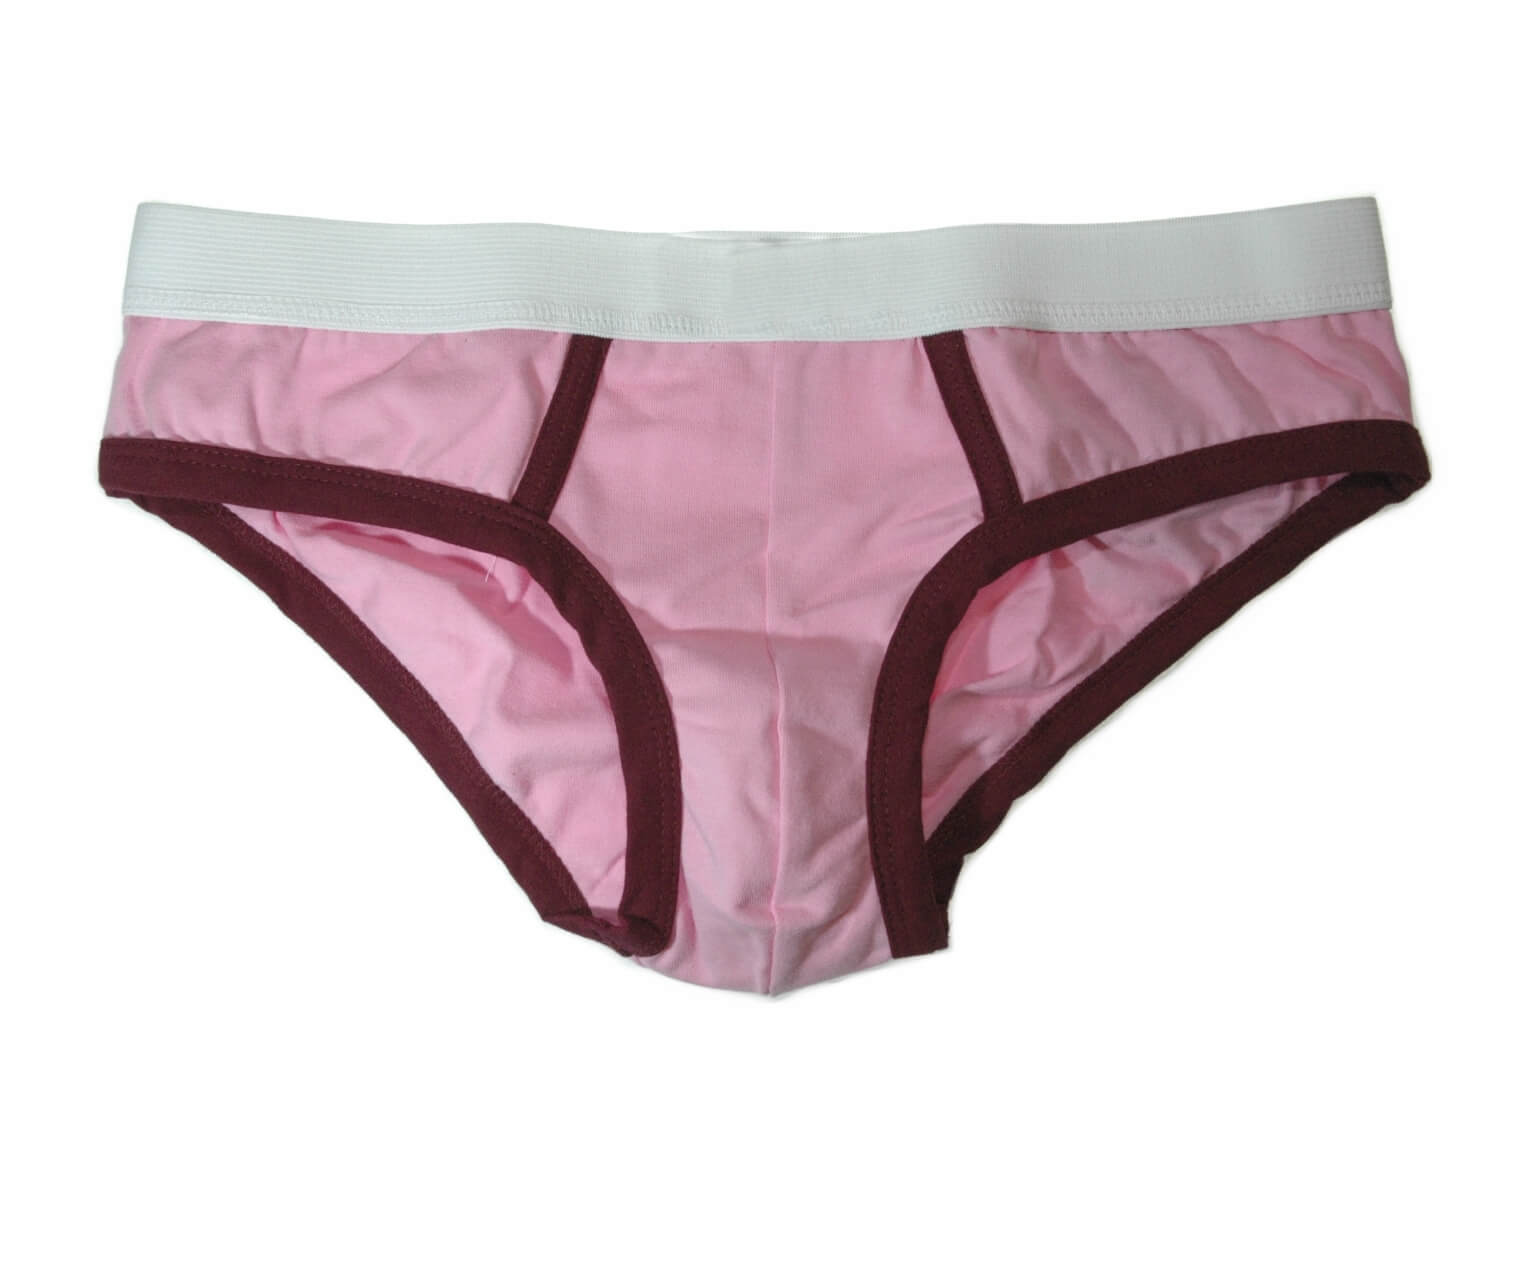 Guess the Undies, The Best Hen Party Games